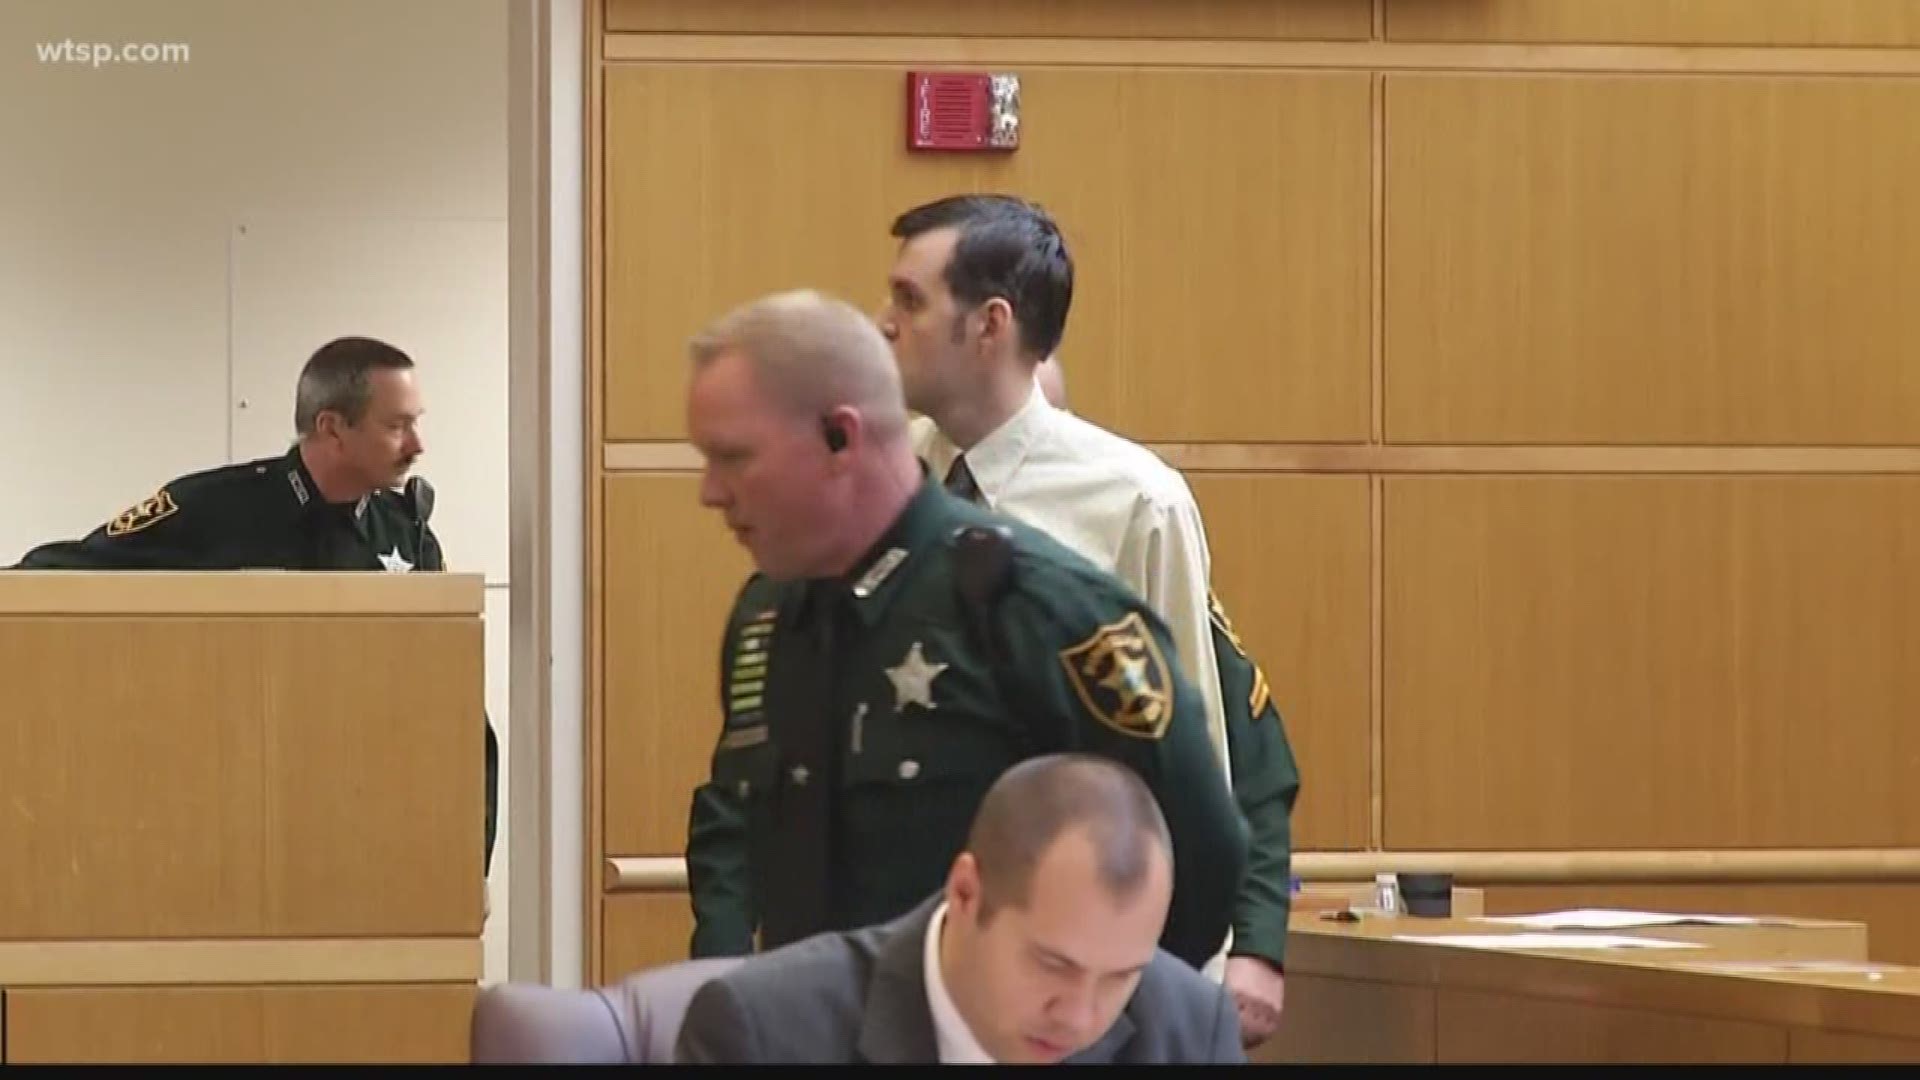 He was convicted in April of murdering his 5-year-old daughter, Phoebe, by dropping her from a St. Petersburg bridge in 2015. https://on.wtsp.com/2kmsRCR